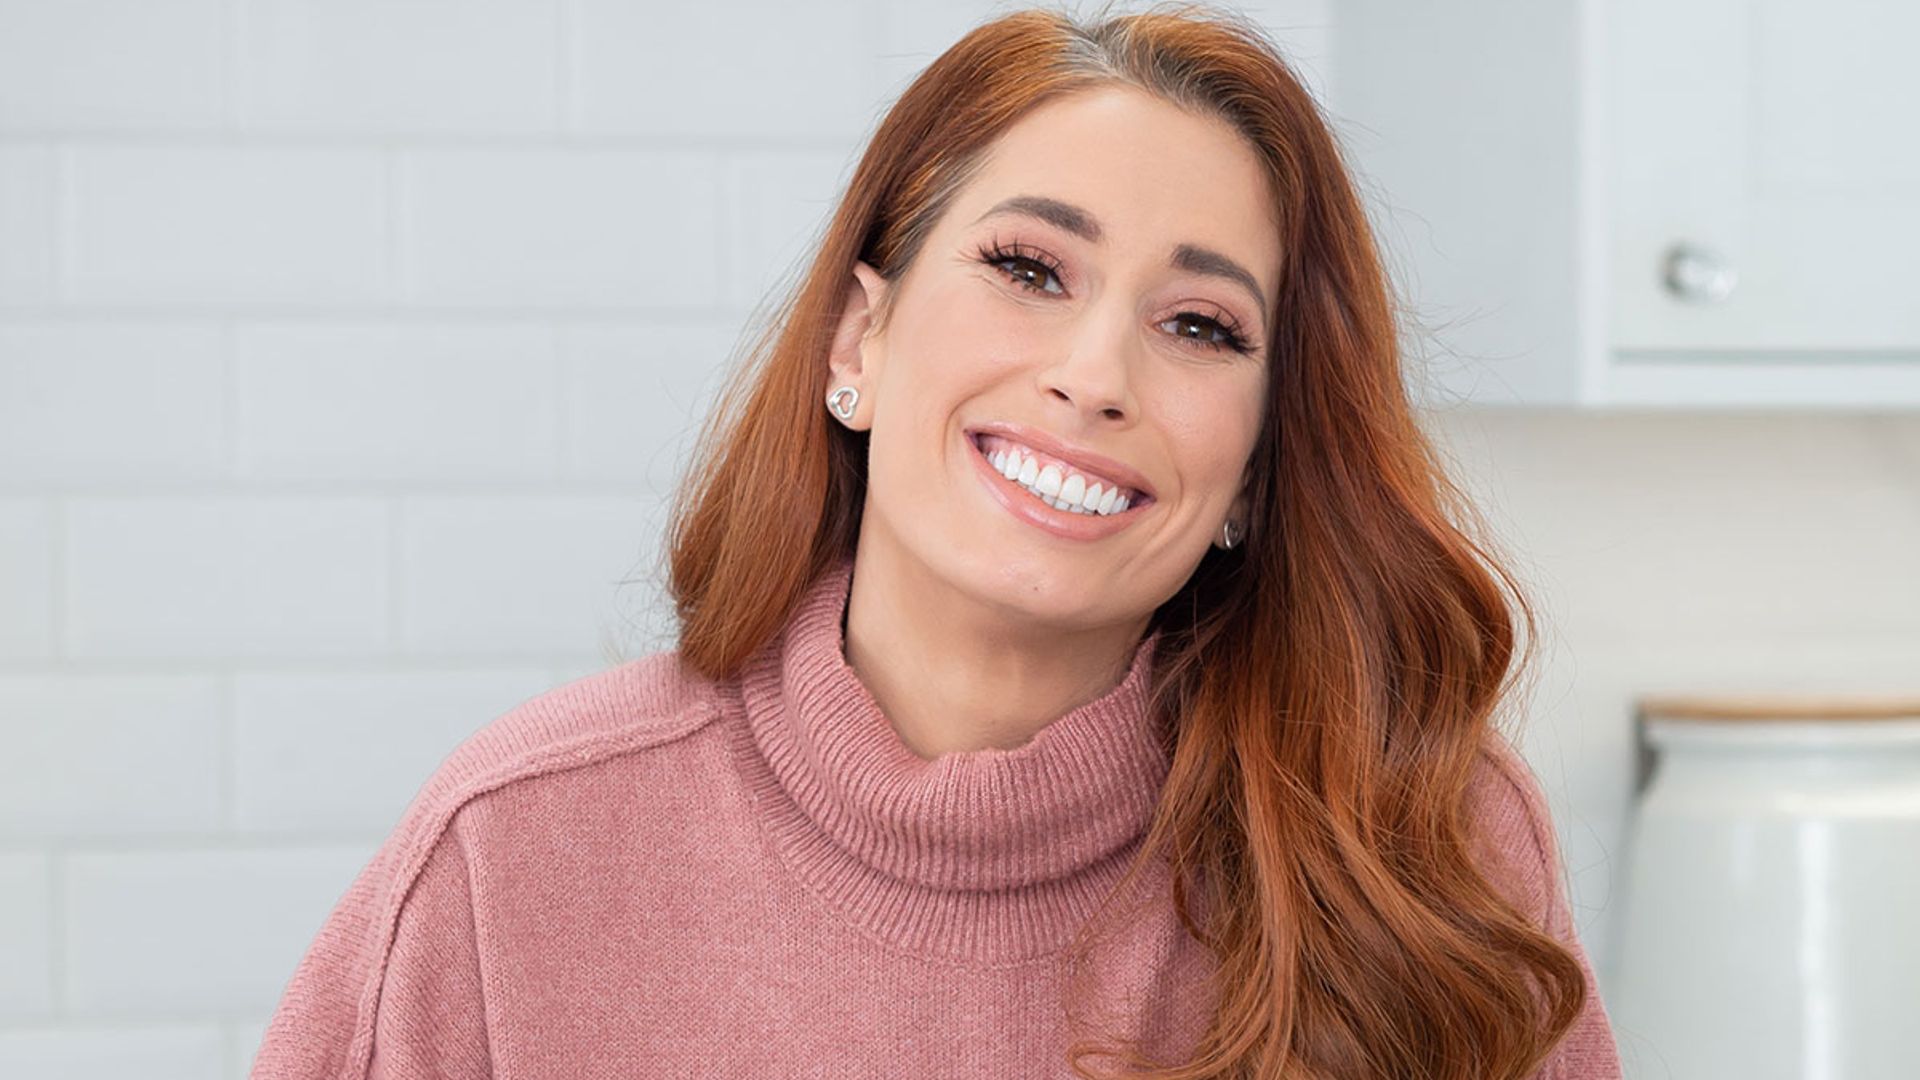 Stacey Solomon Shares Emotional Announcement With Fans Ahead Of Wedding